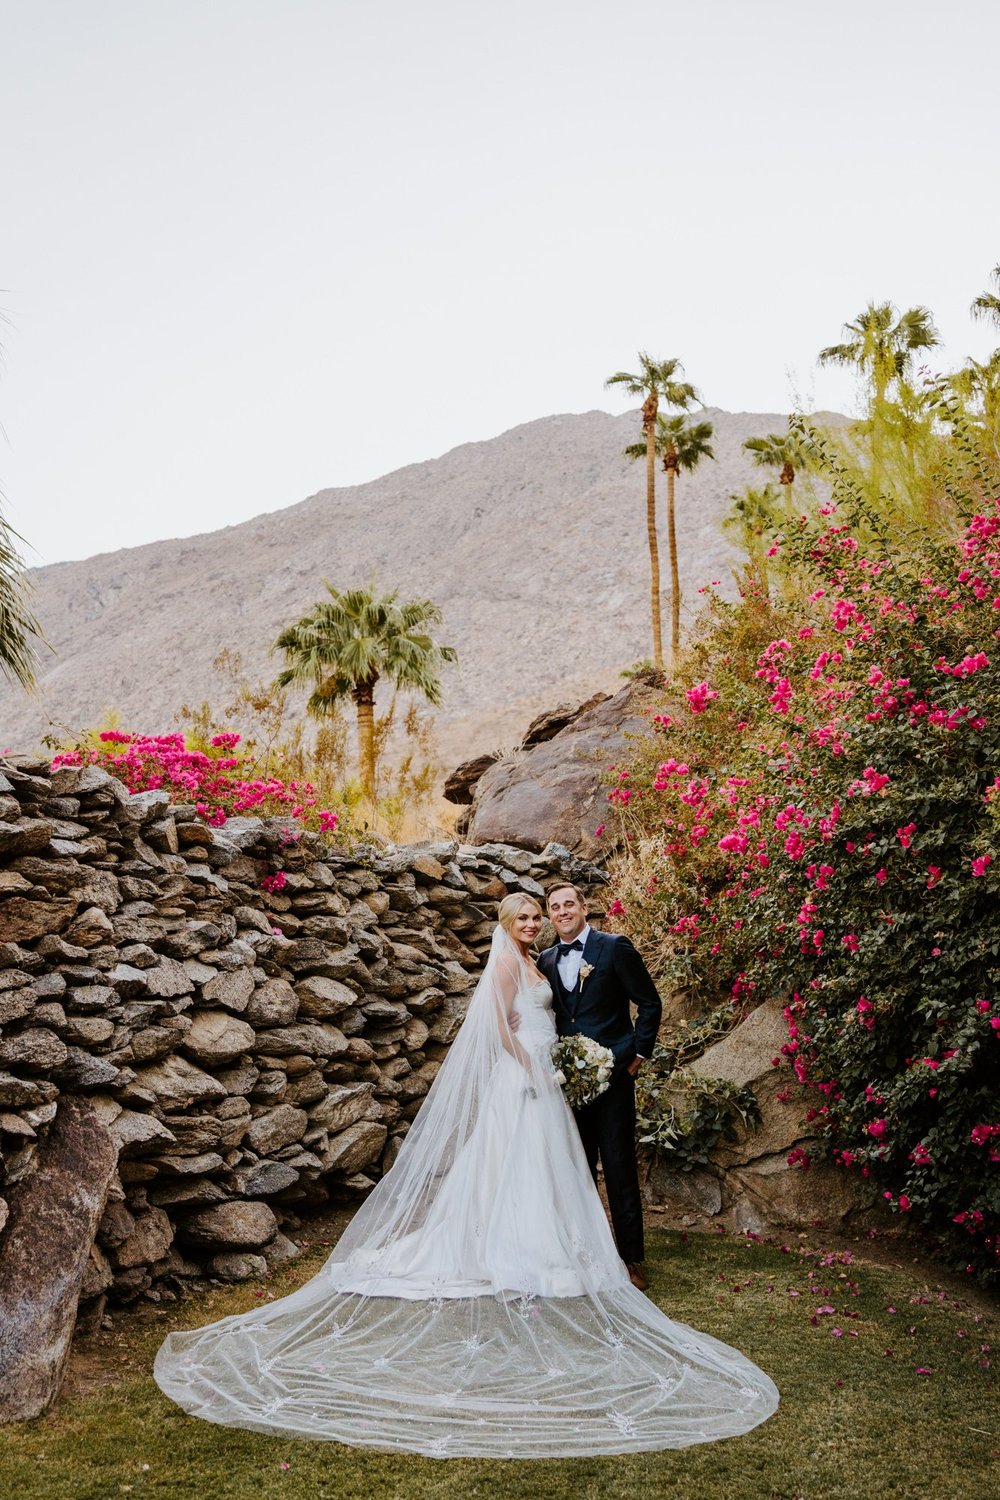 Elegant and classic bride with cathedral veil, bride and groom portrait at The O’Donnell House wedding in Palm Springs, vibrant southern california wedding photography by Tida Svy